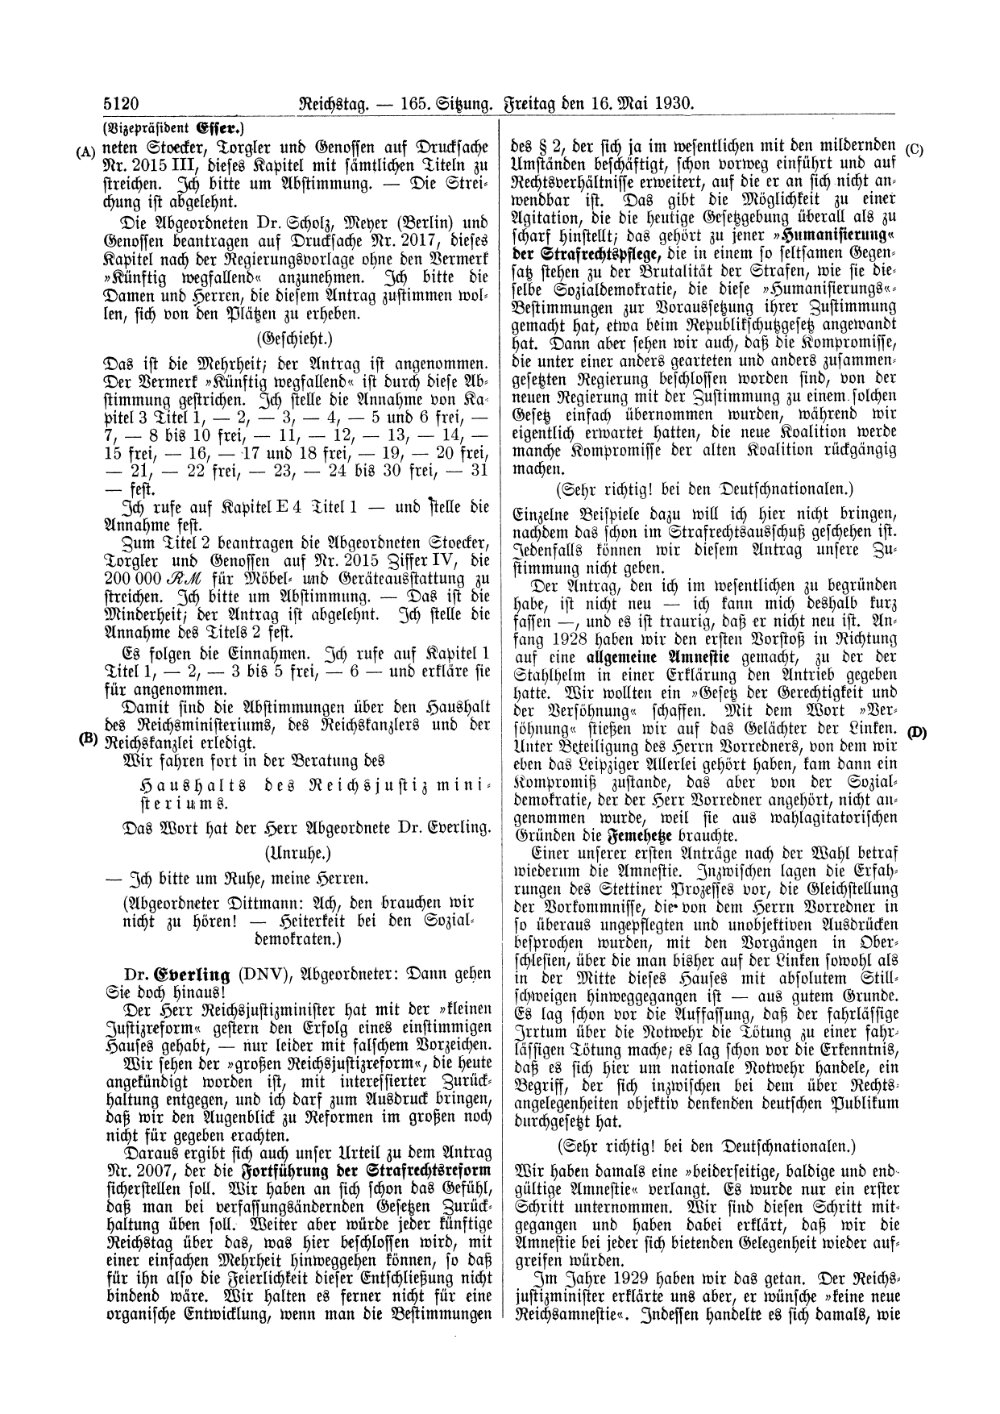 Scan of page 5120